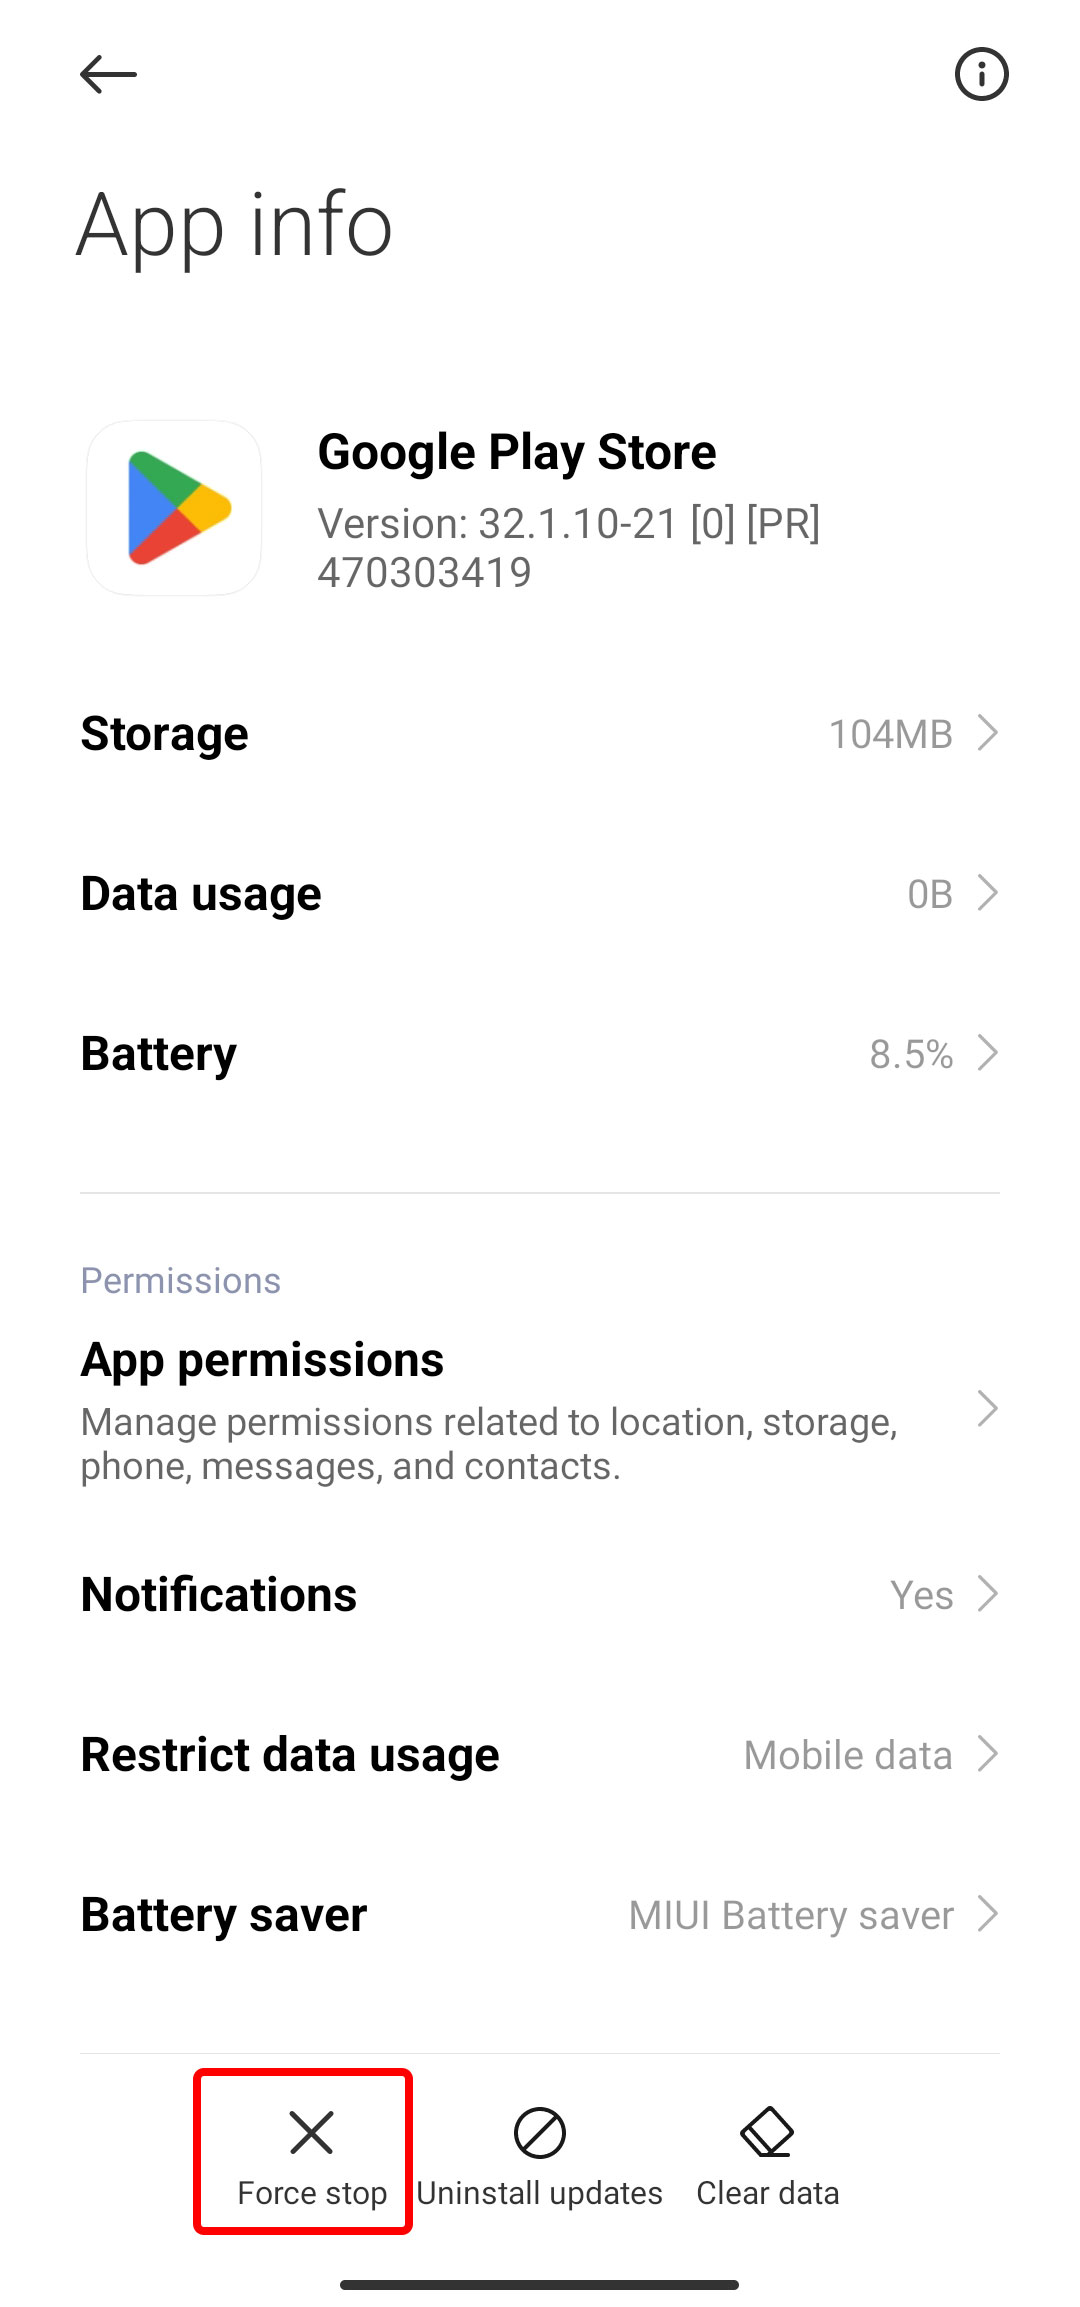 Forced stop of Google Play application on Android